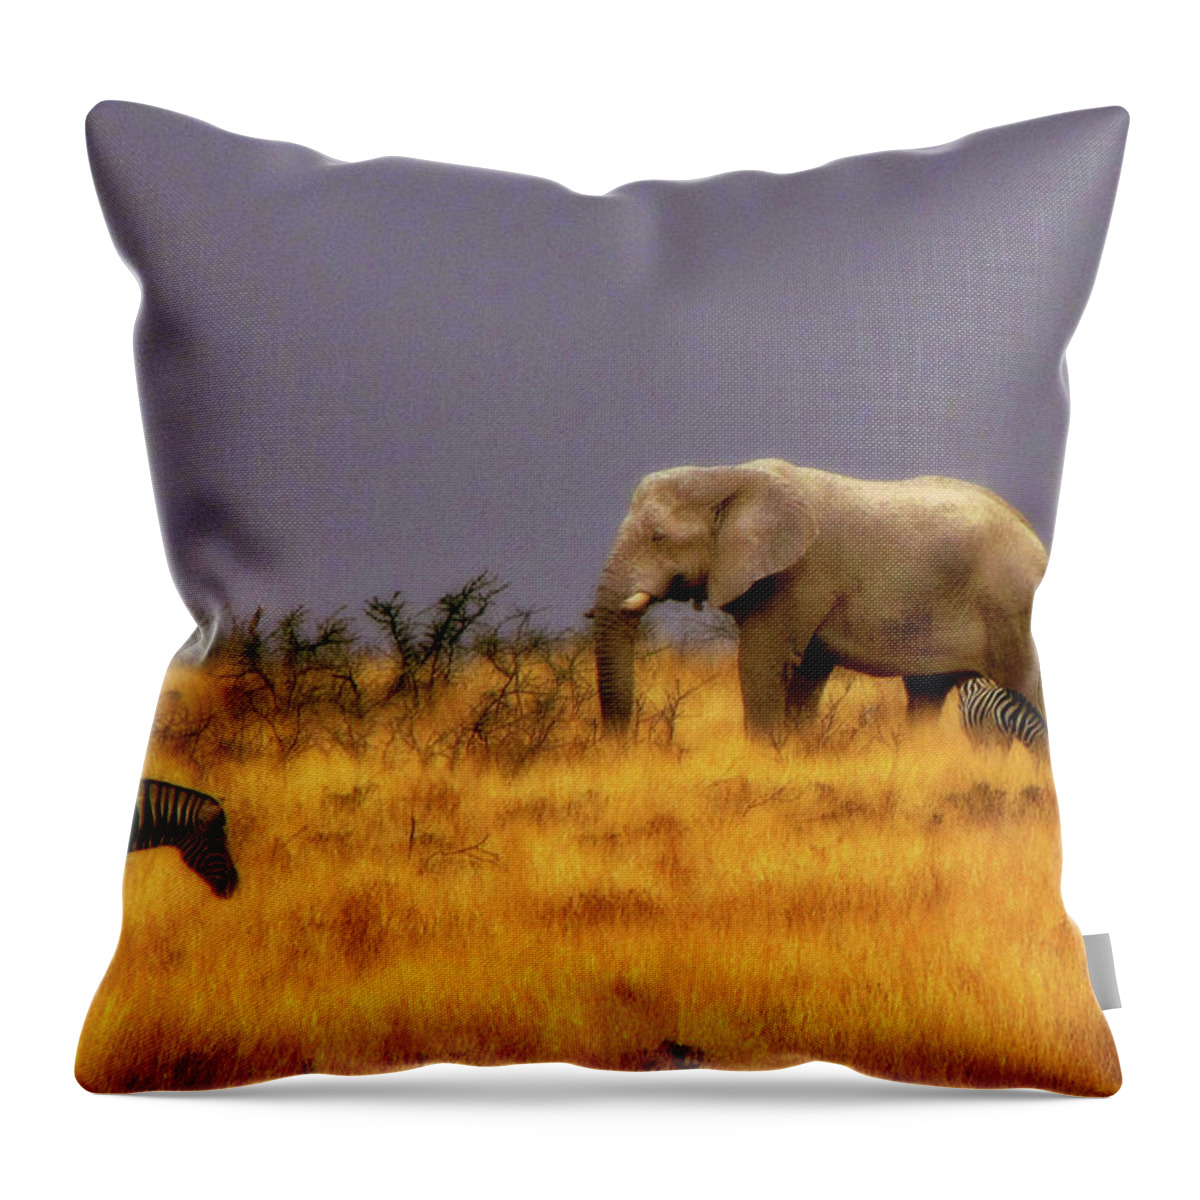 Namibia Throw Pillow featuring the photograph Namibia #9 by Paul James Bannerman